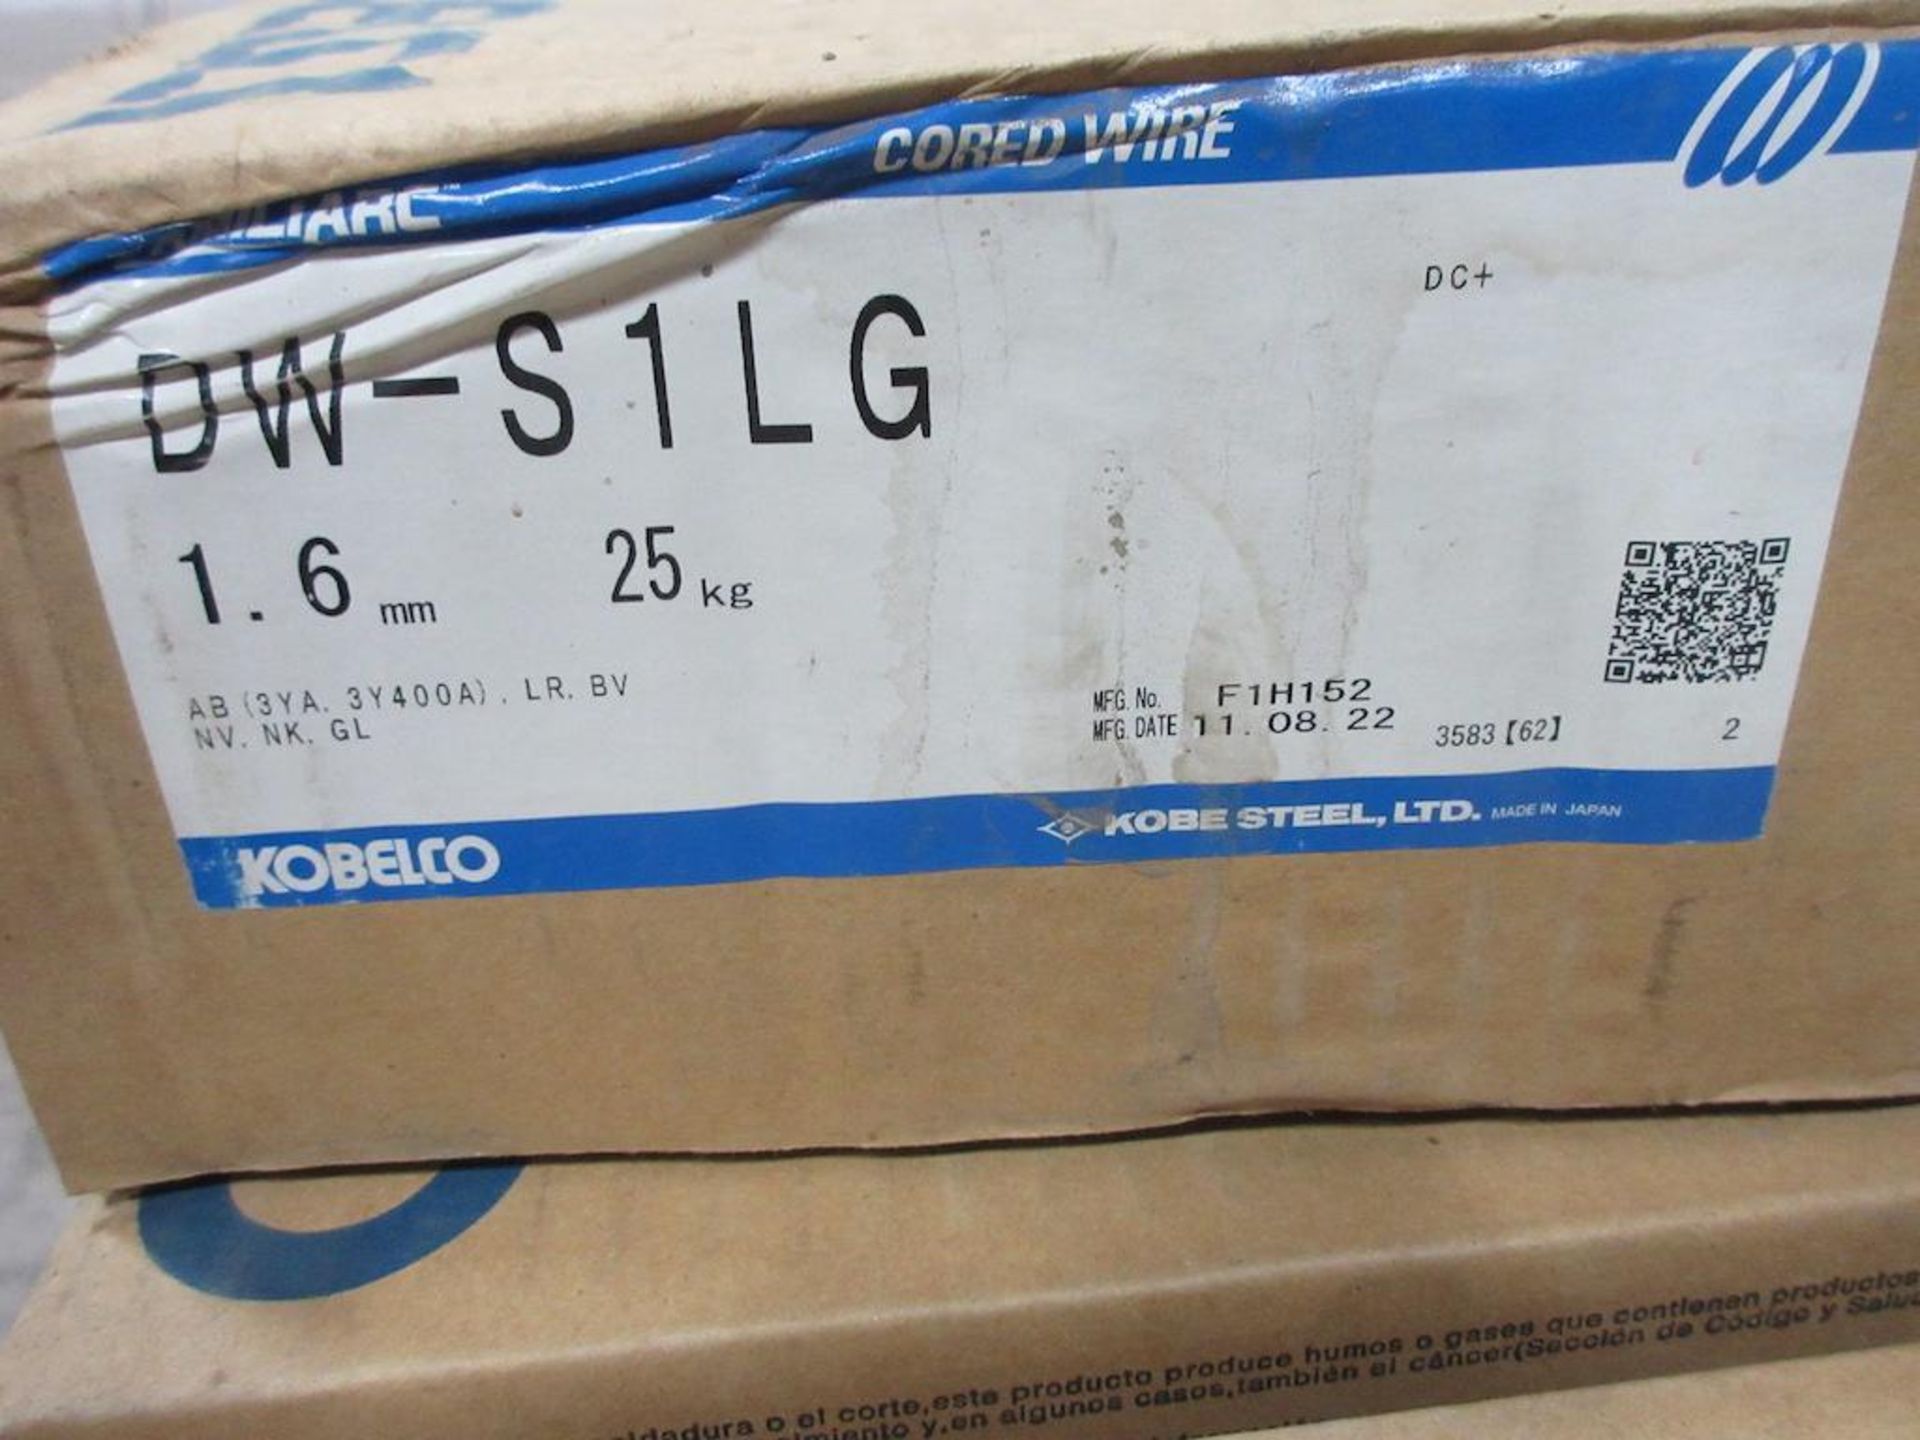 (1) SKID APPROX. 23 BOXES, KOBELCO CORED WIRE MODEL DW-S1LG, 1.6MM - Image 2 of 2